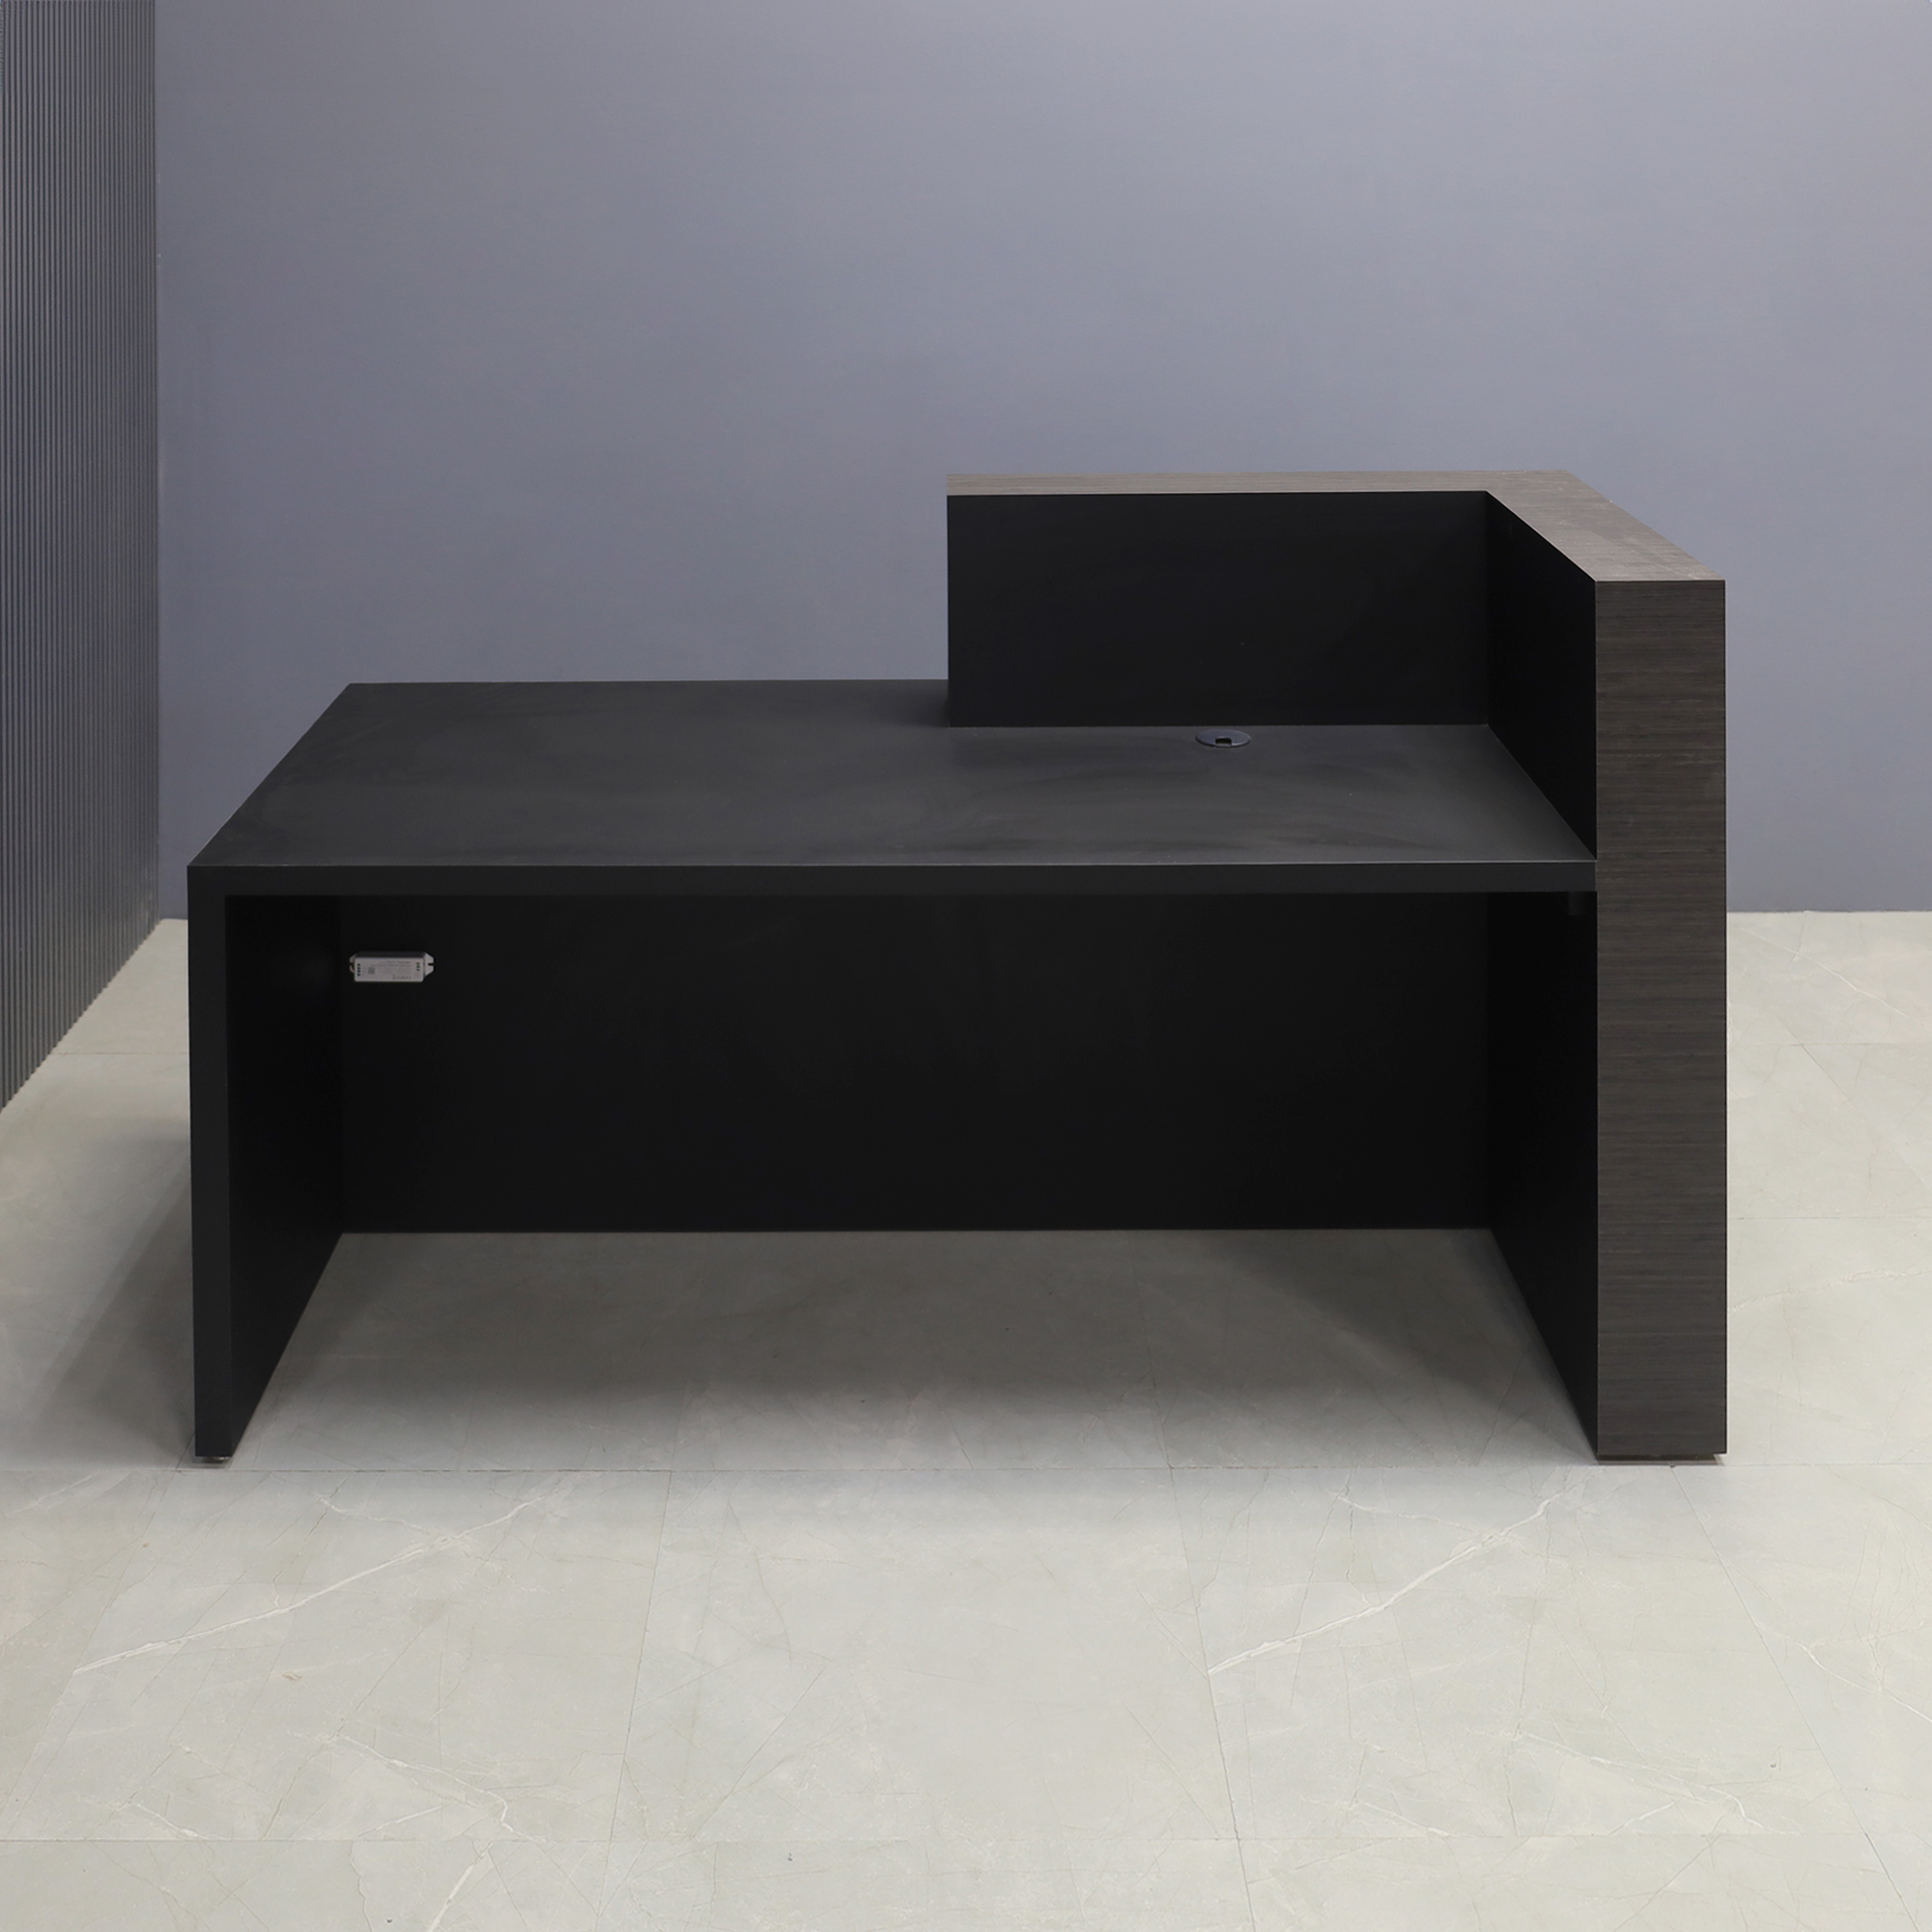 72-inch Atlanta Reception Desk, left countertop side when facing front in asian nights matte laminate and workspace & front accent in black traceless laminate, with warm white LED, shown here.